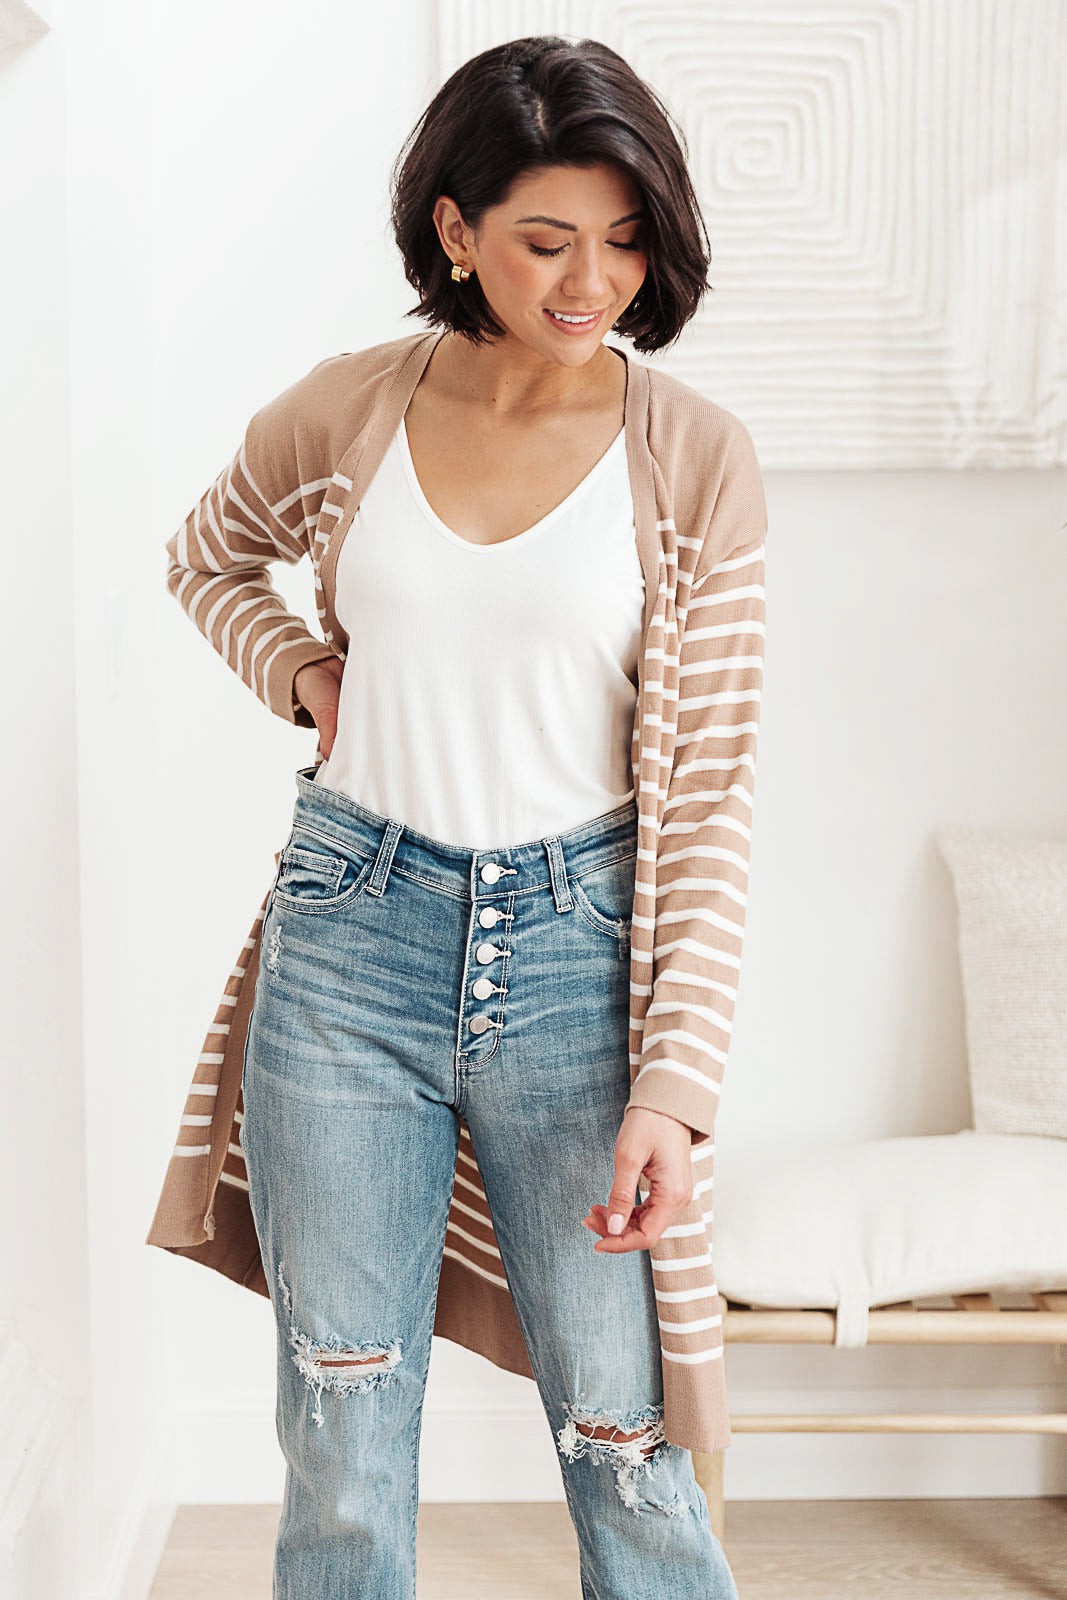 Taking it Easy Striped Cardigan In Taupe   